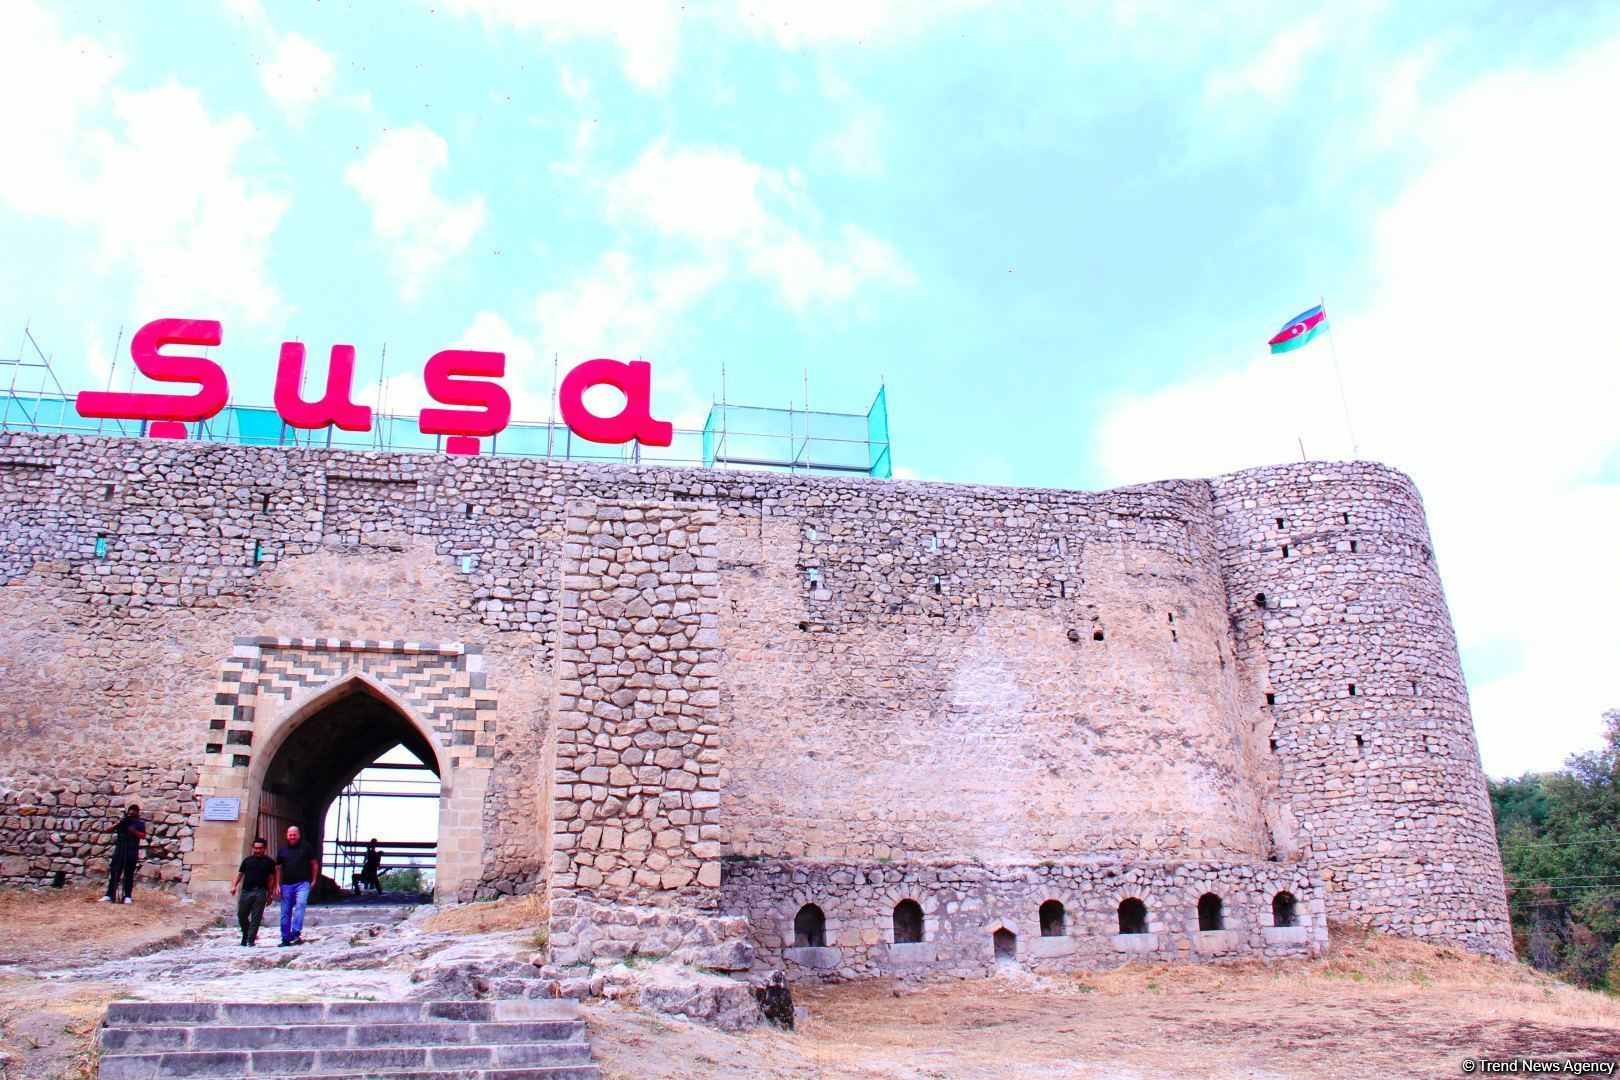 Beautiful architecture of Azerbaijan's Shusha was destroyed during Armenian occupation - expert